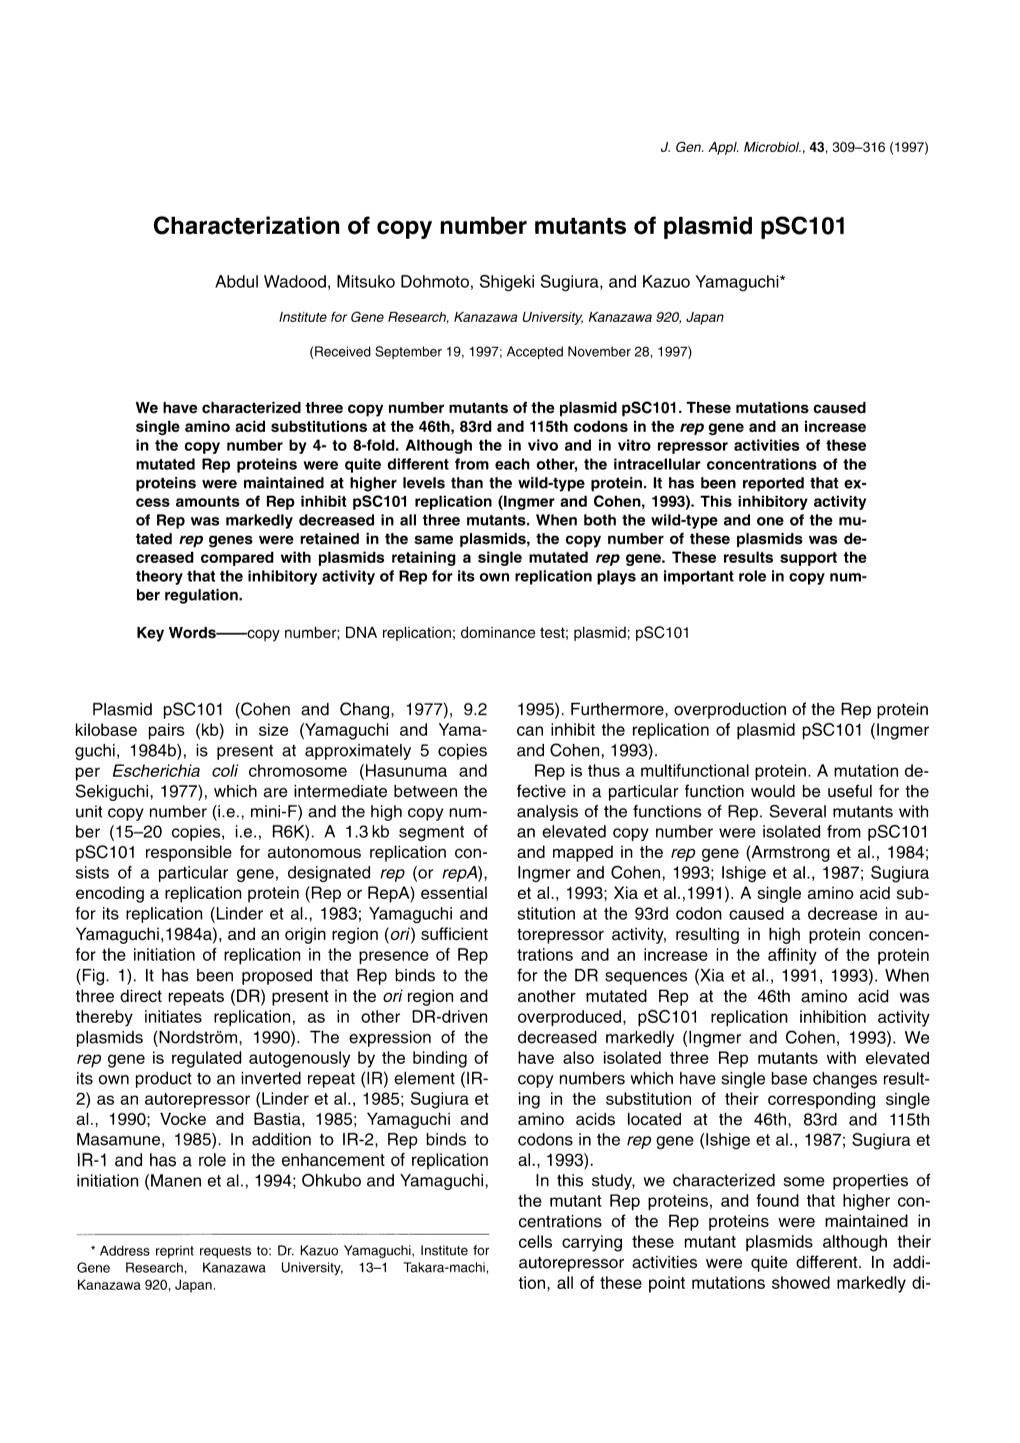 Characterization of Copy Number Mutants of Plasmid Psc101